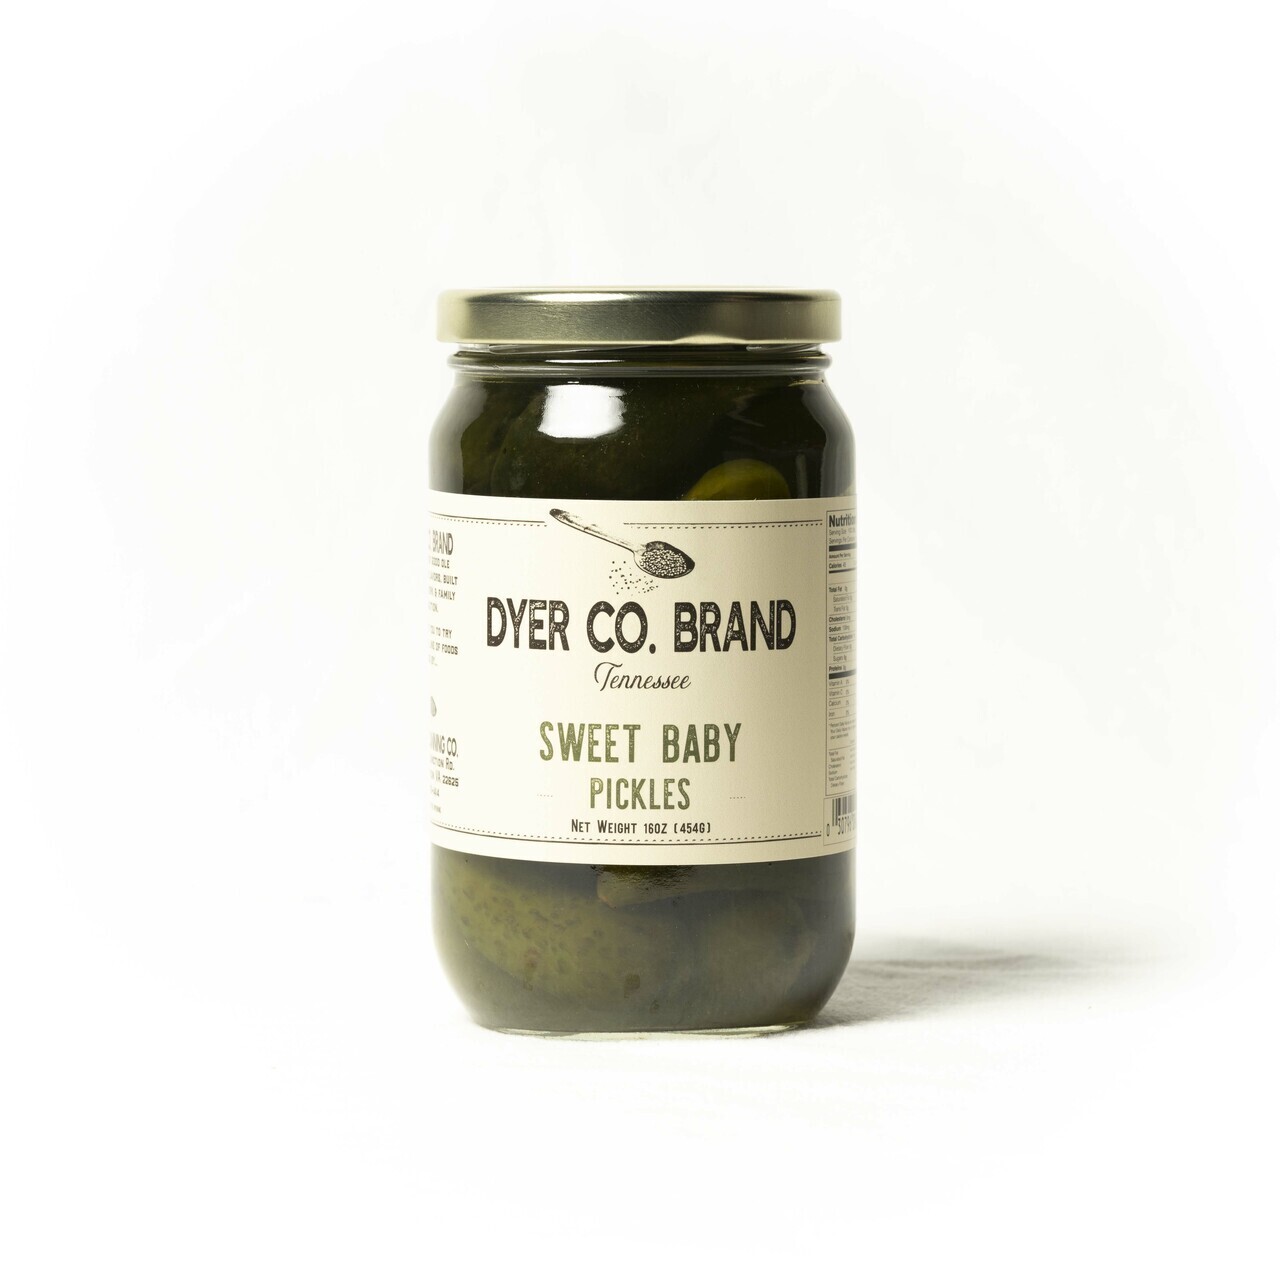 Dyer Co Brand Sweet Baby Pickles